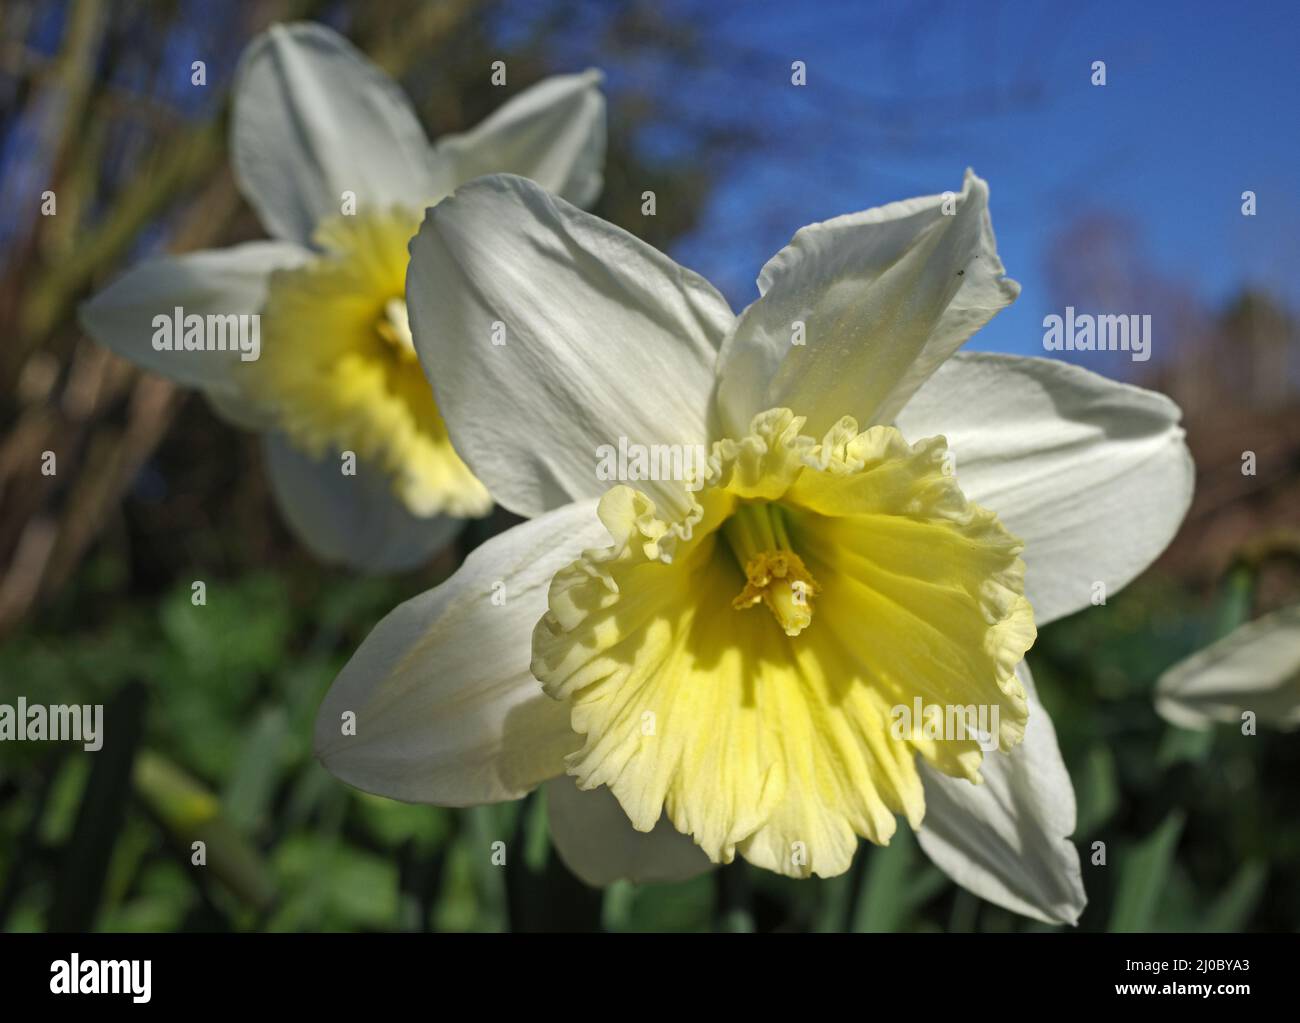 Lovely white daffodils with an light yellow trumpet growing in the wild. It is a cultivar with the name 'Ice Follies', so someone planted a bulb here. Stock Photo